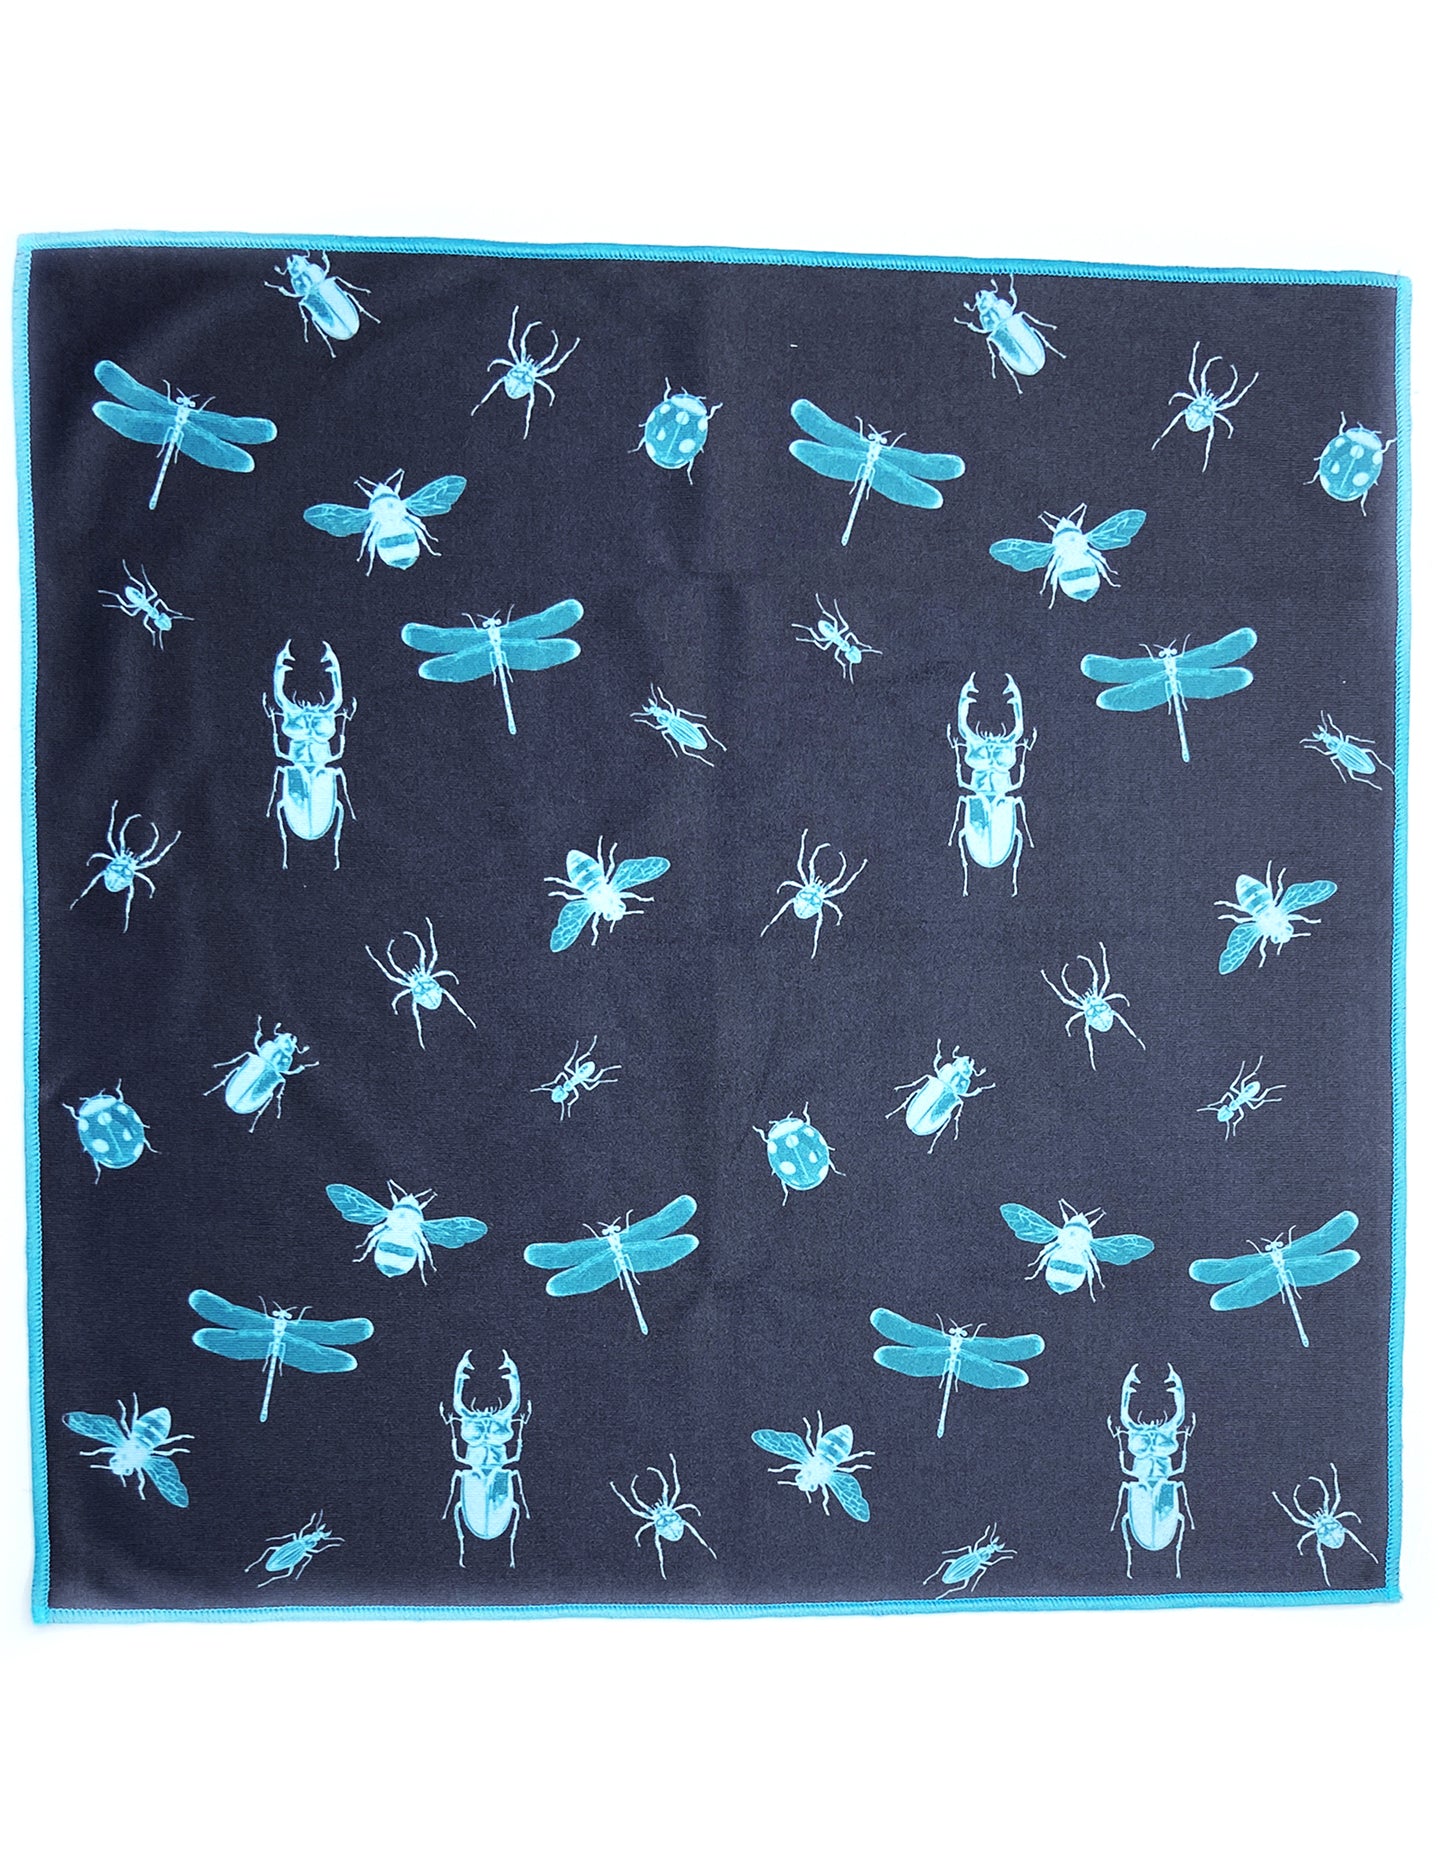 black insect printed pocket square